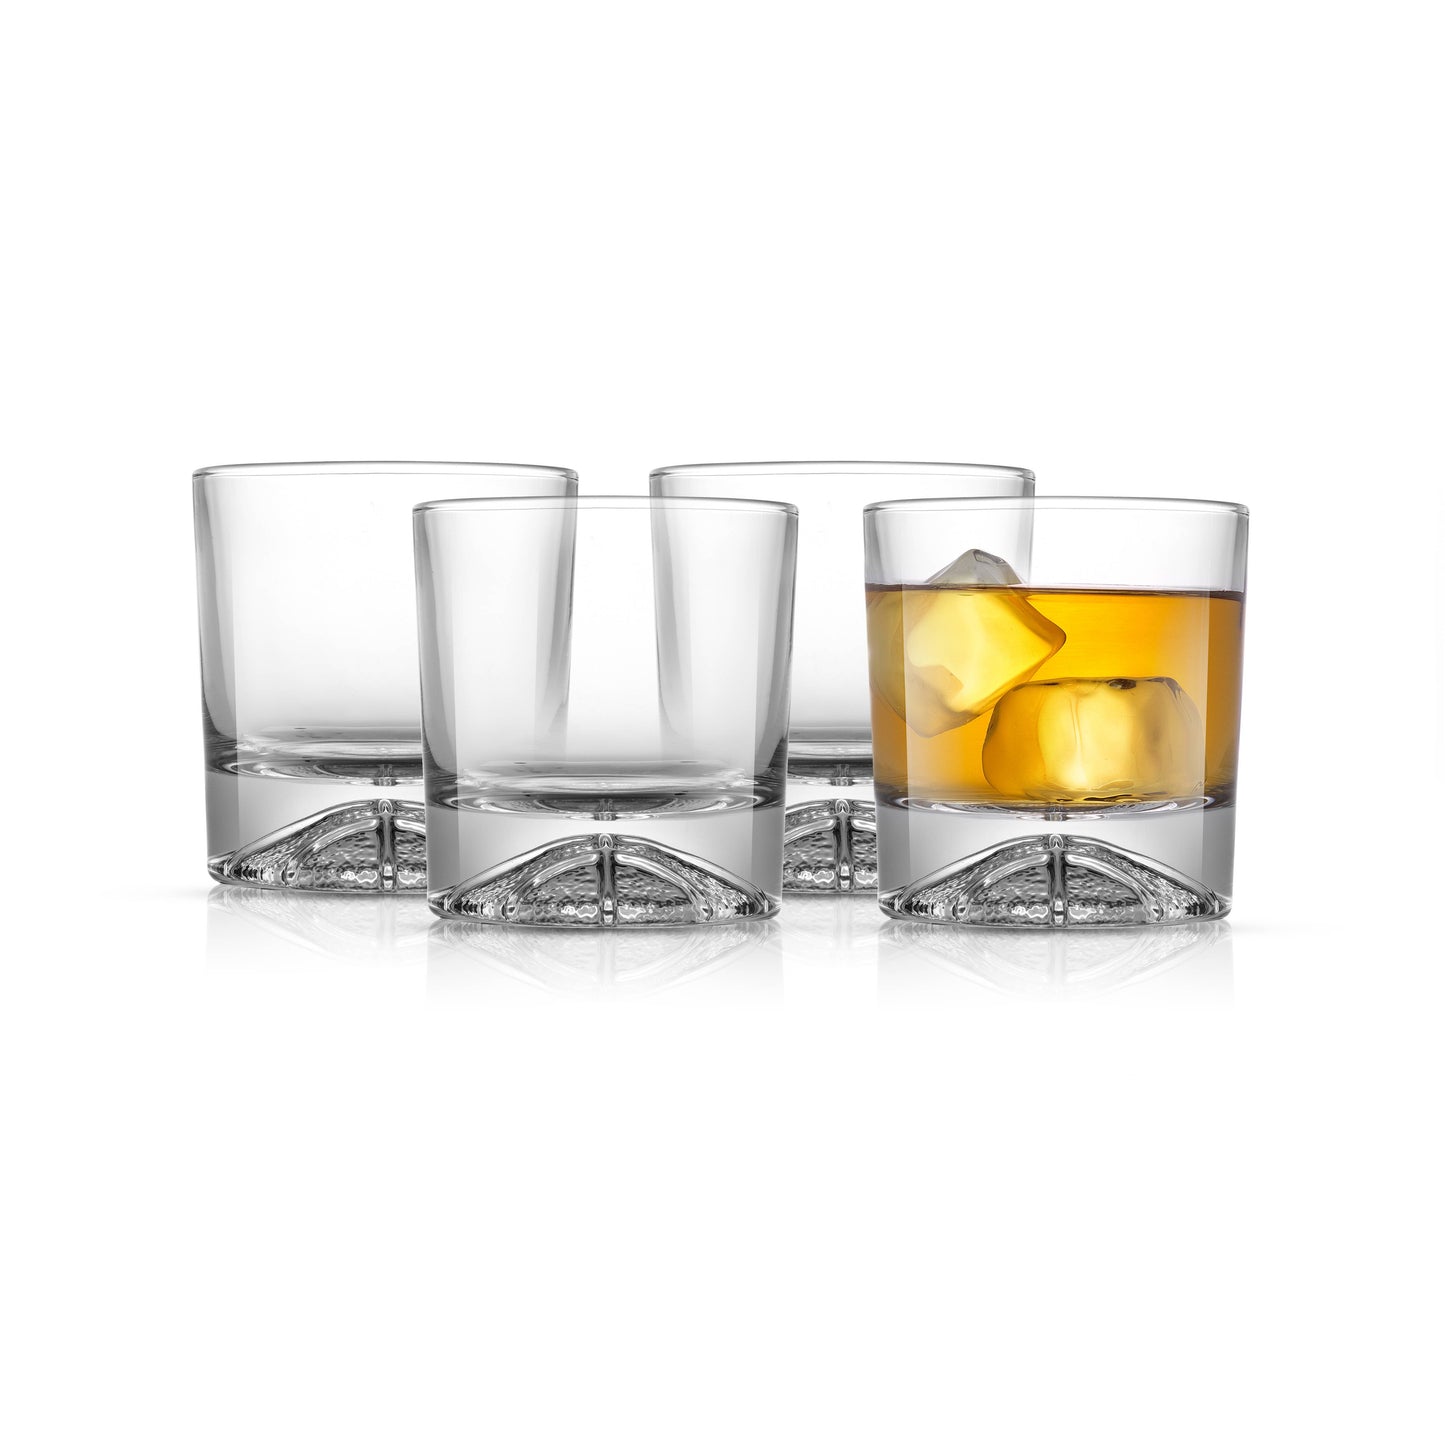 Swish Old Double Fashioned Whiskey Glasses